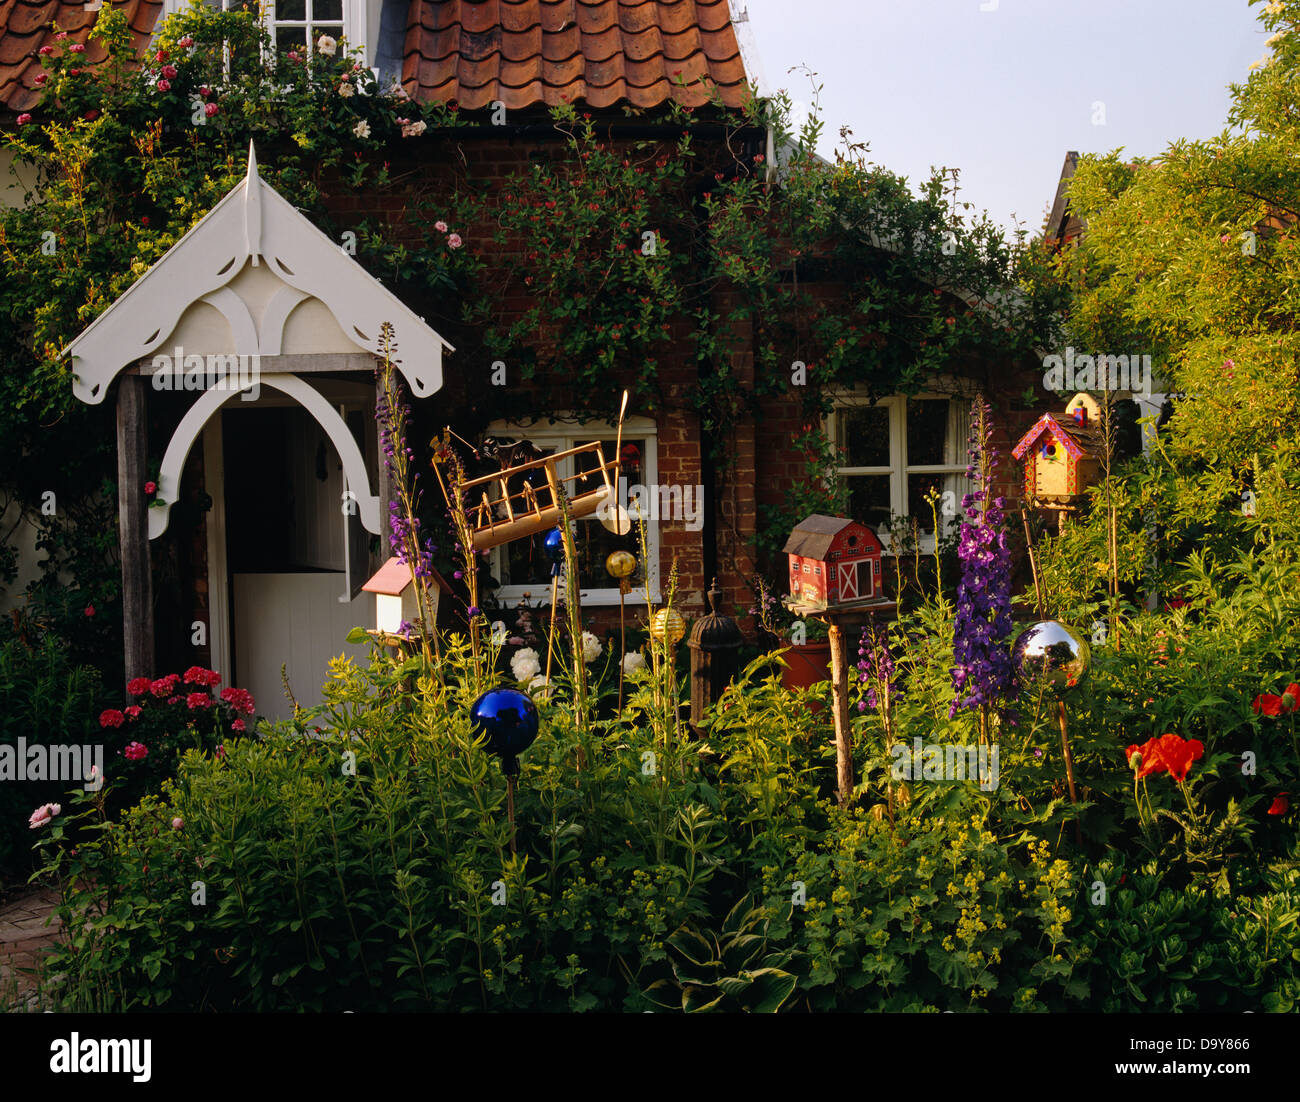 Wooden bird houses on sticks among flowering summer plants in garden of country cottage with white porch Stock Photo